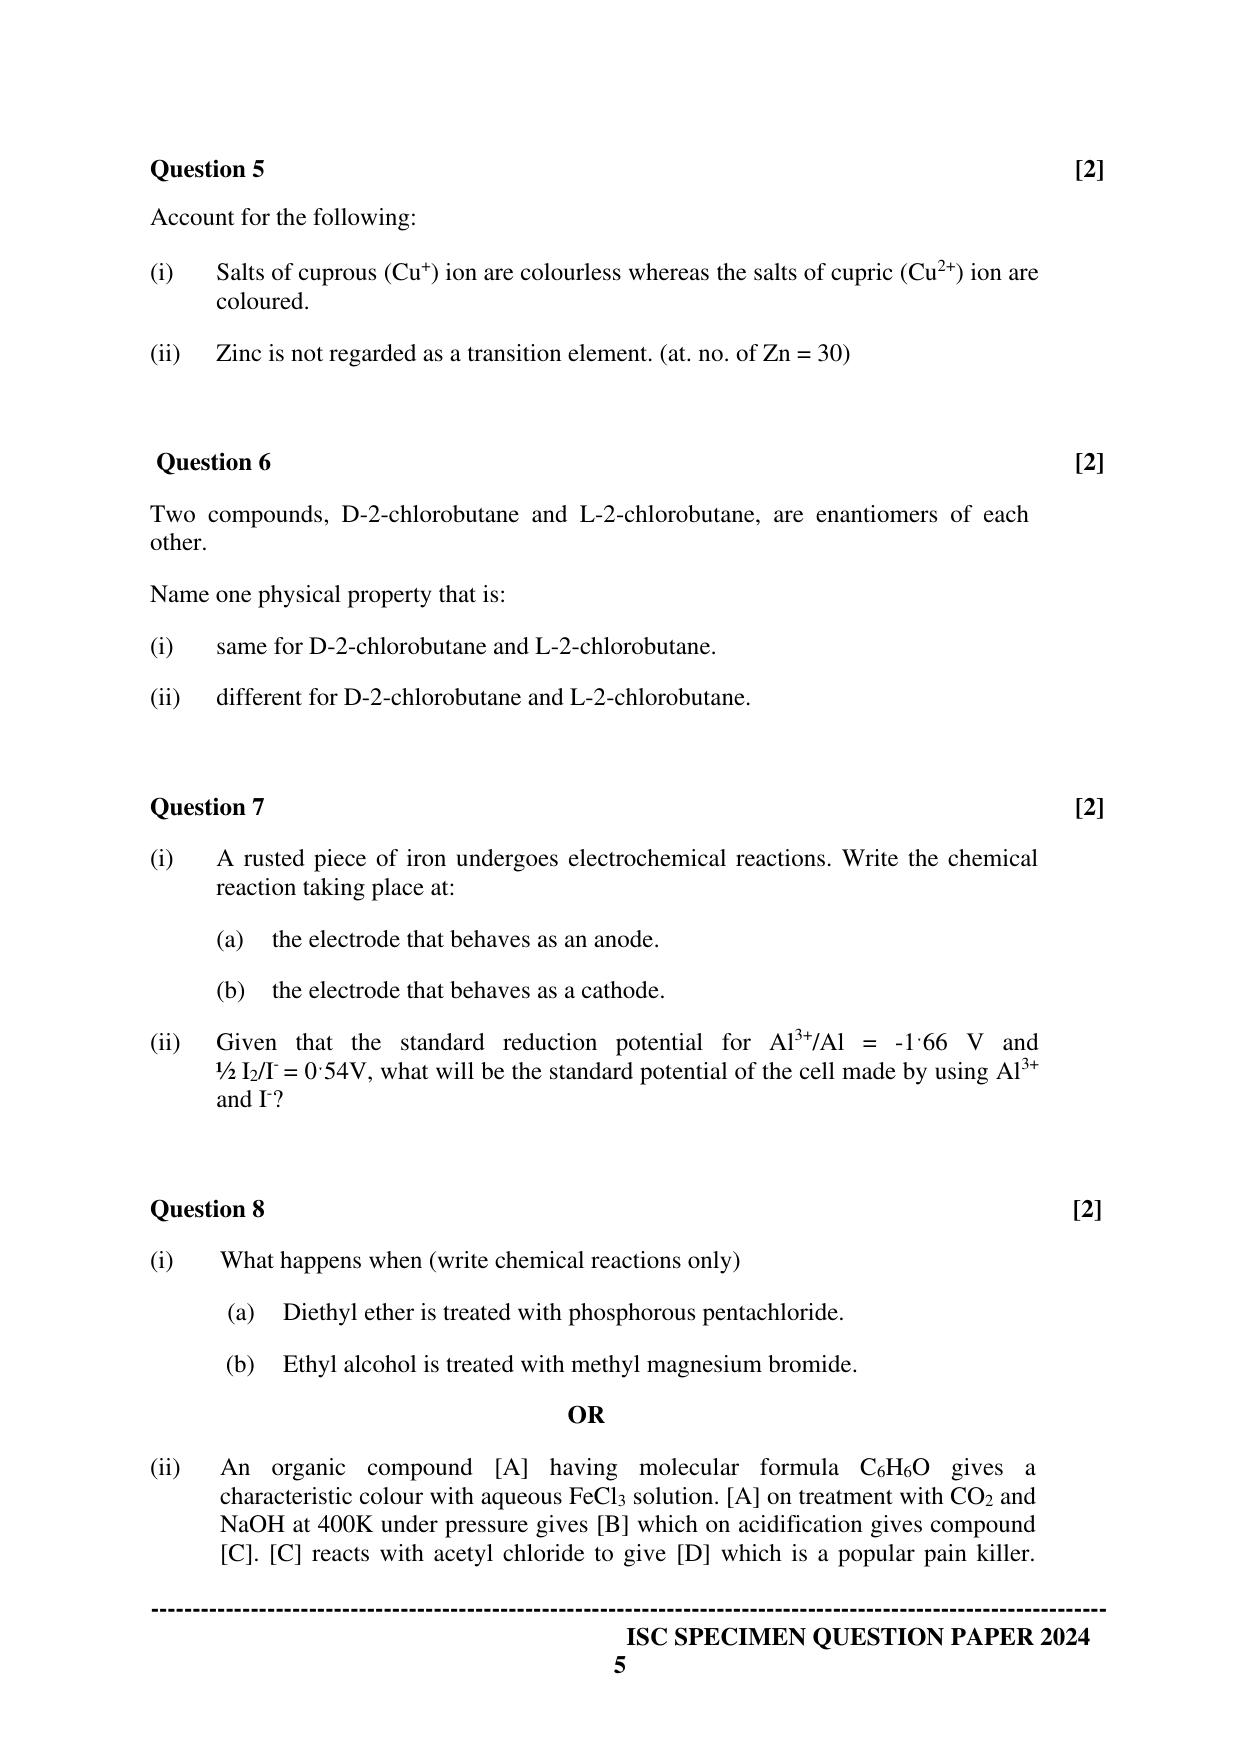 ISC Class 12 2024 CHEMISTRY PAPER 1 Sample Paper - Page 5